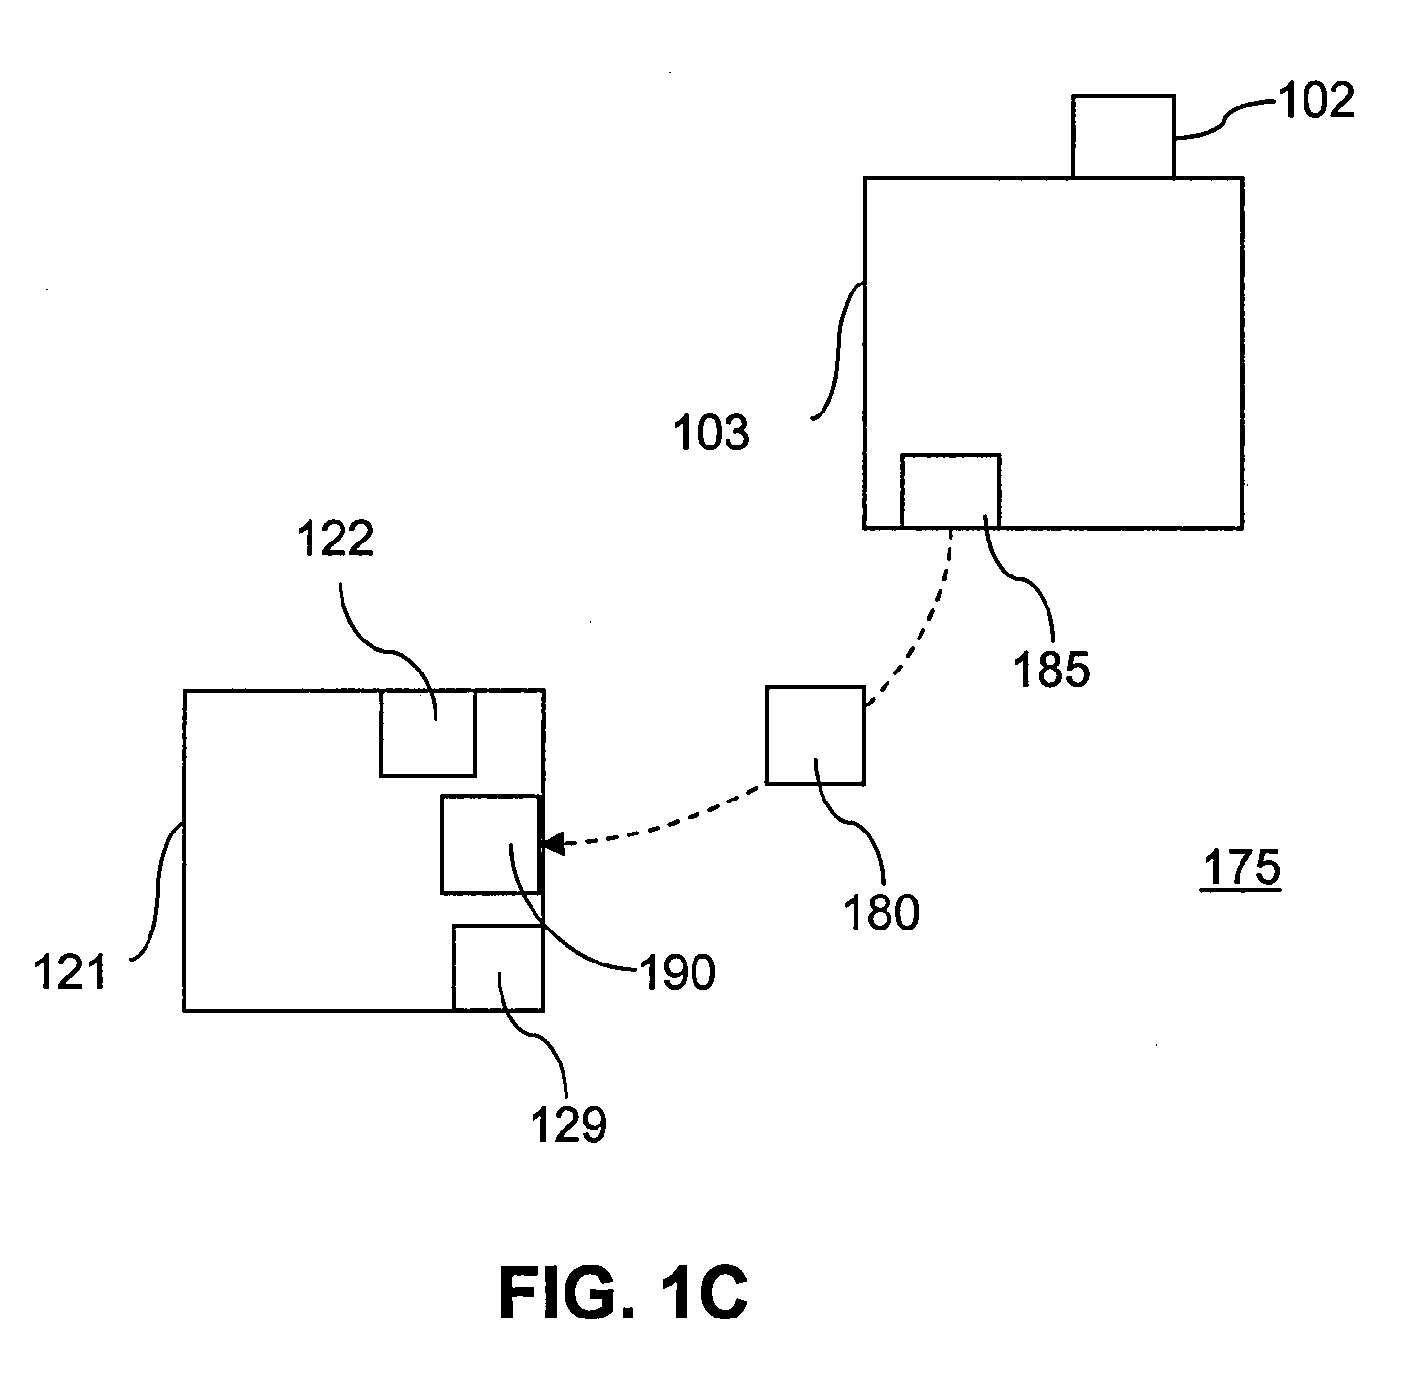 Passive single camera imaging system for determining motor vehicle speed